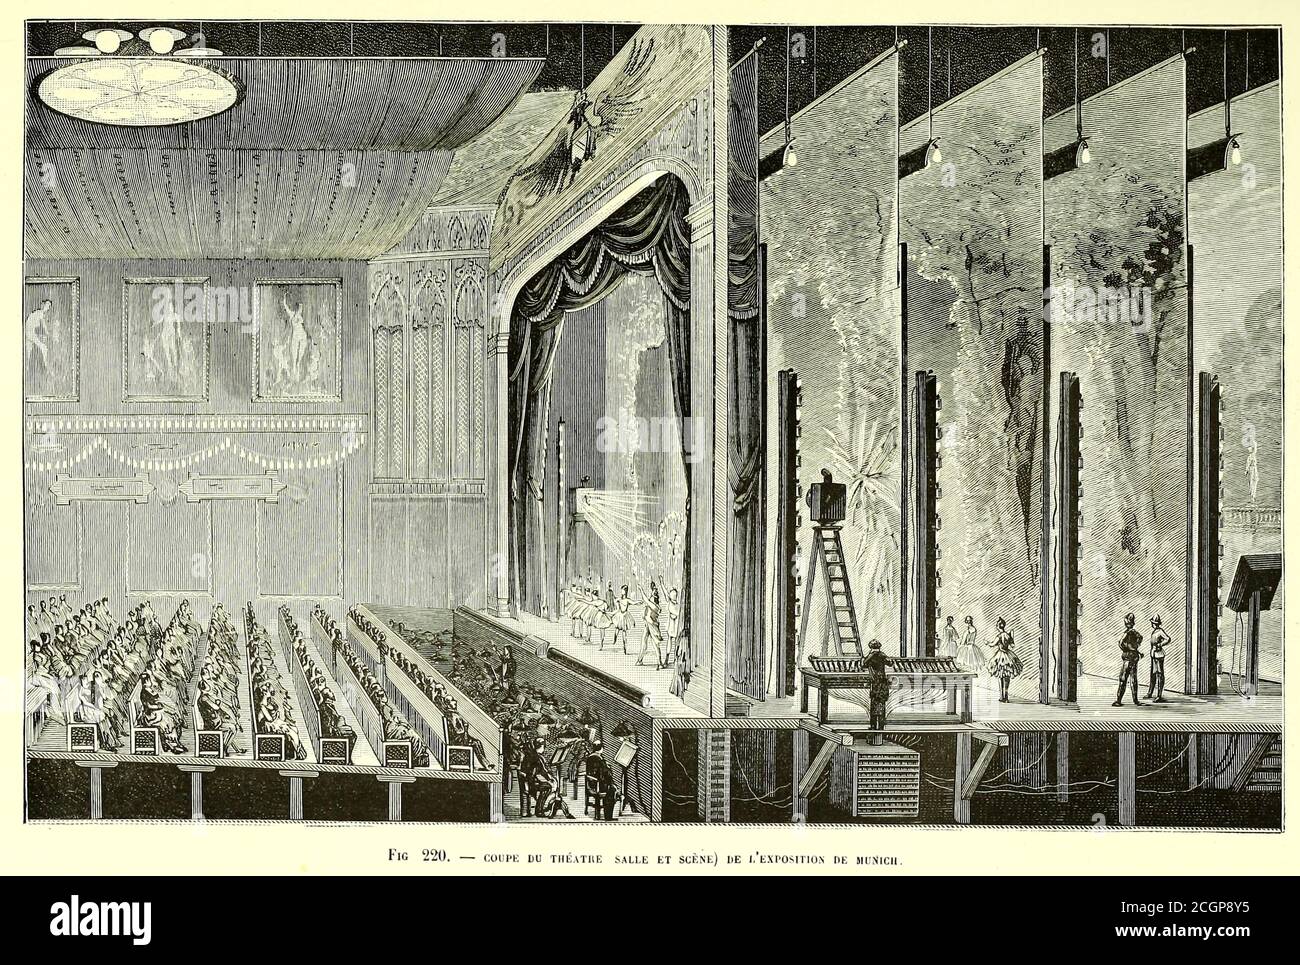 Electric lighting used in a theatre at the Munich expo. From the Book Les  merveilles de la science, ou Description populaire des inventions modernes  [The Wonders of Science, or Popular Description of